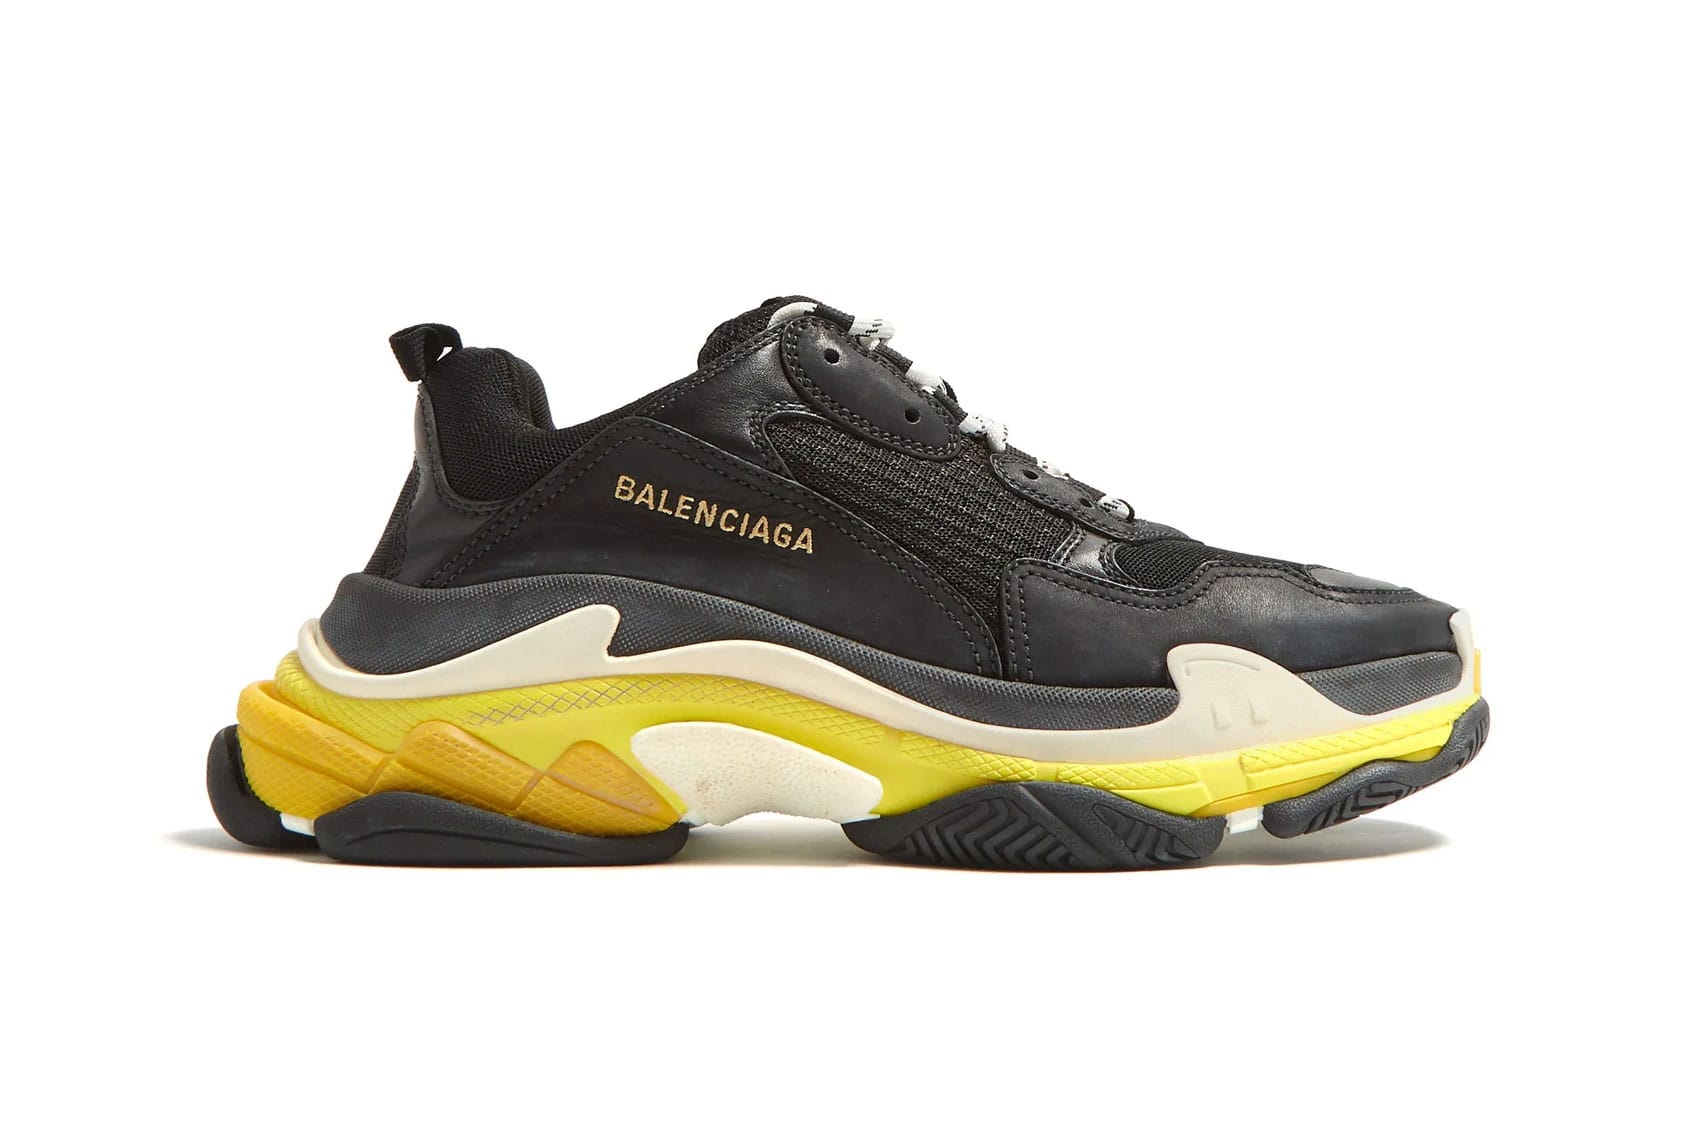 Balenciaga Leather triple S Stack Midsole Mesh Sneakers in